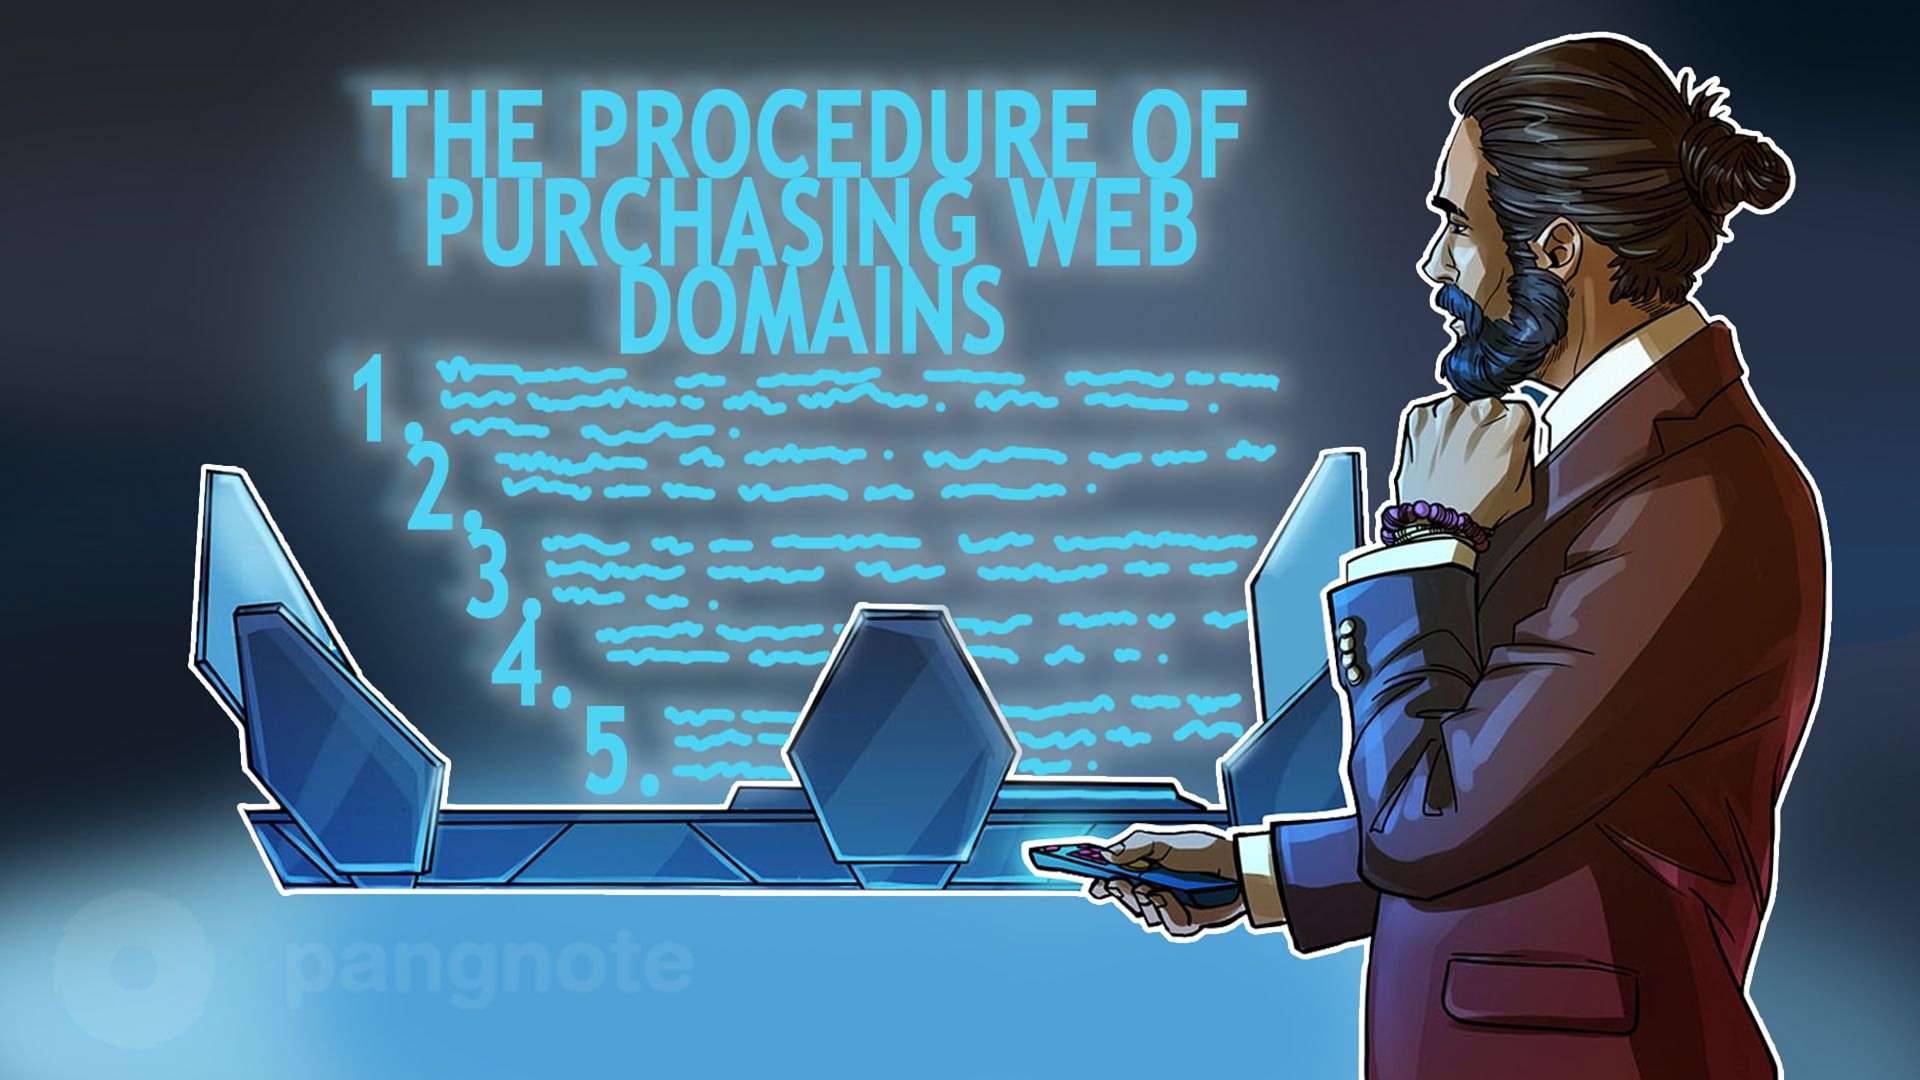 The procedure of purchasing web domains